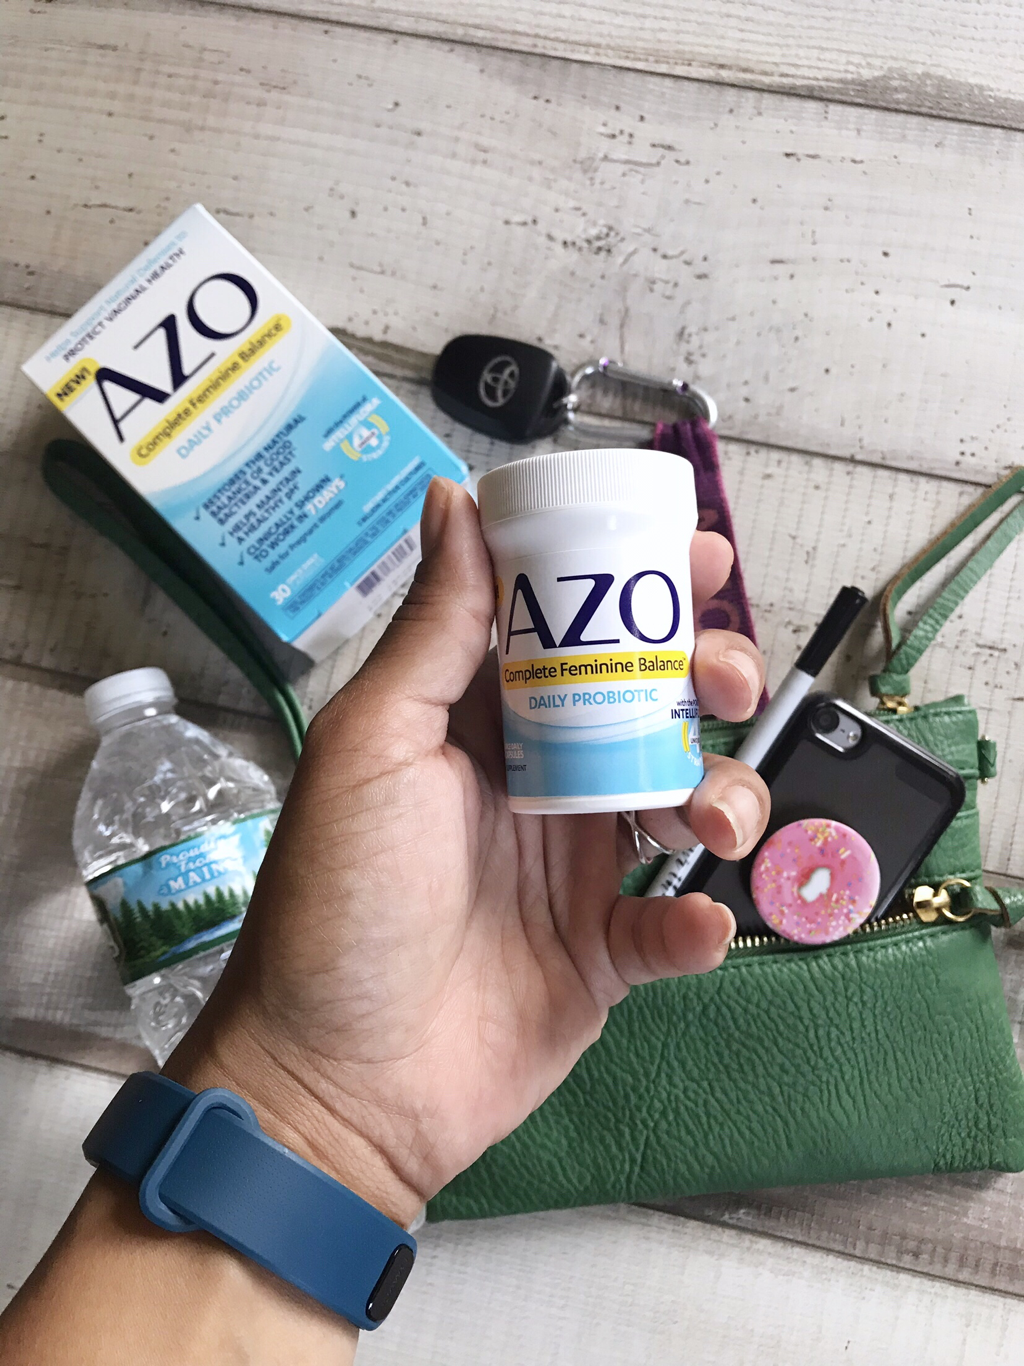 MY TOP 3 PRODUCT FOR HEALTHY FEMININE BALANCE #Sponsored #OwnYourDay #AliciaEverAfterBlog